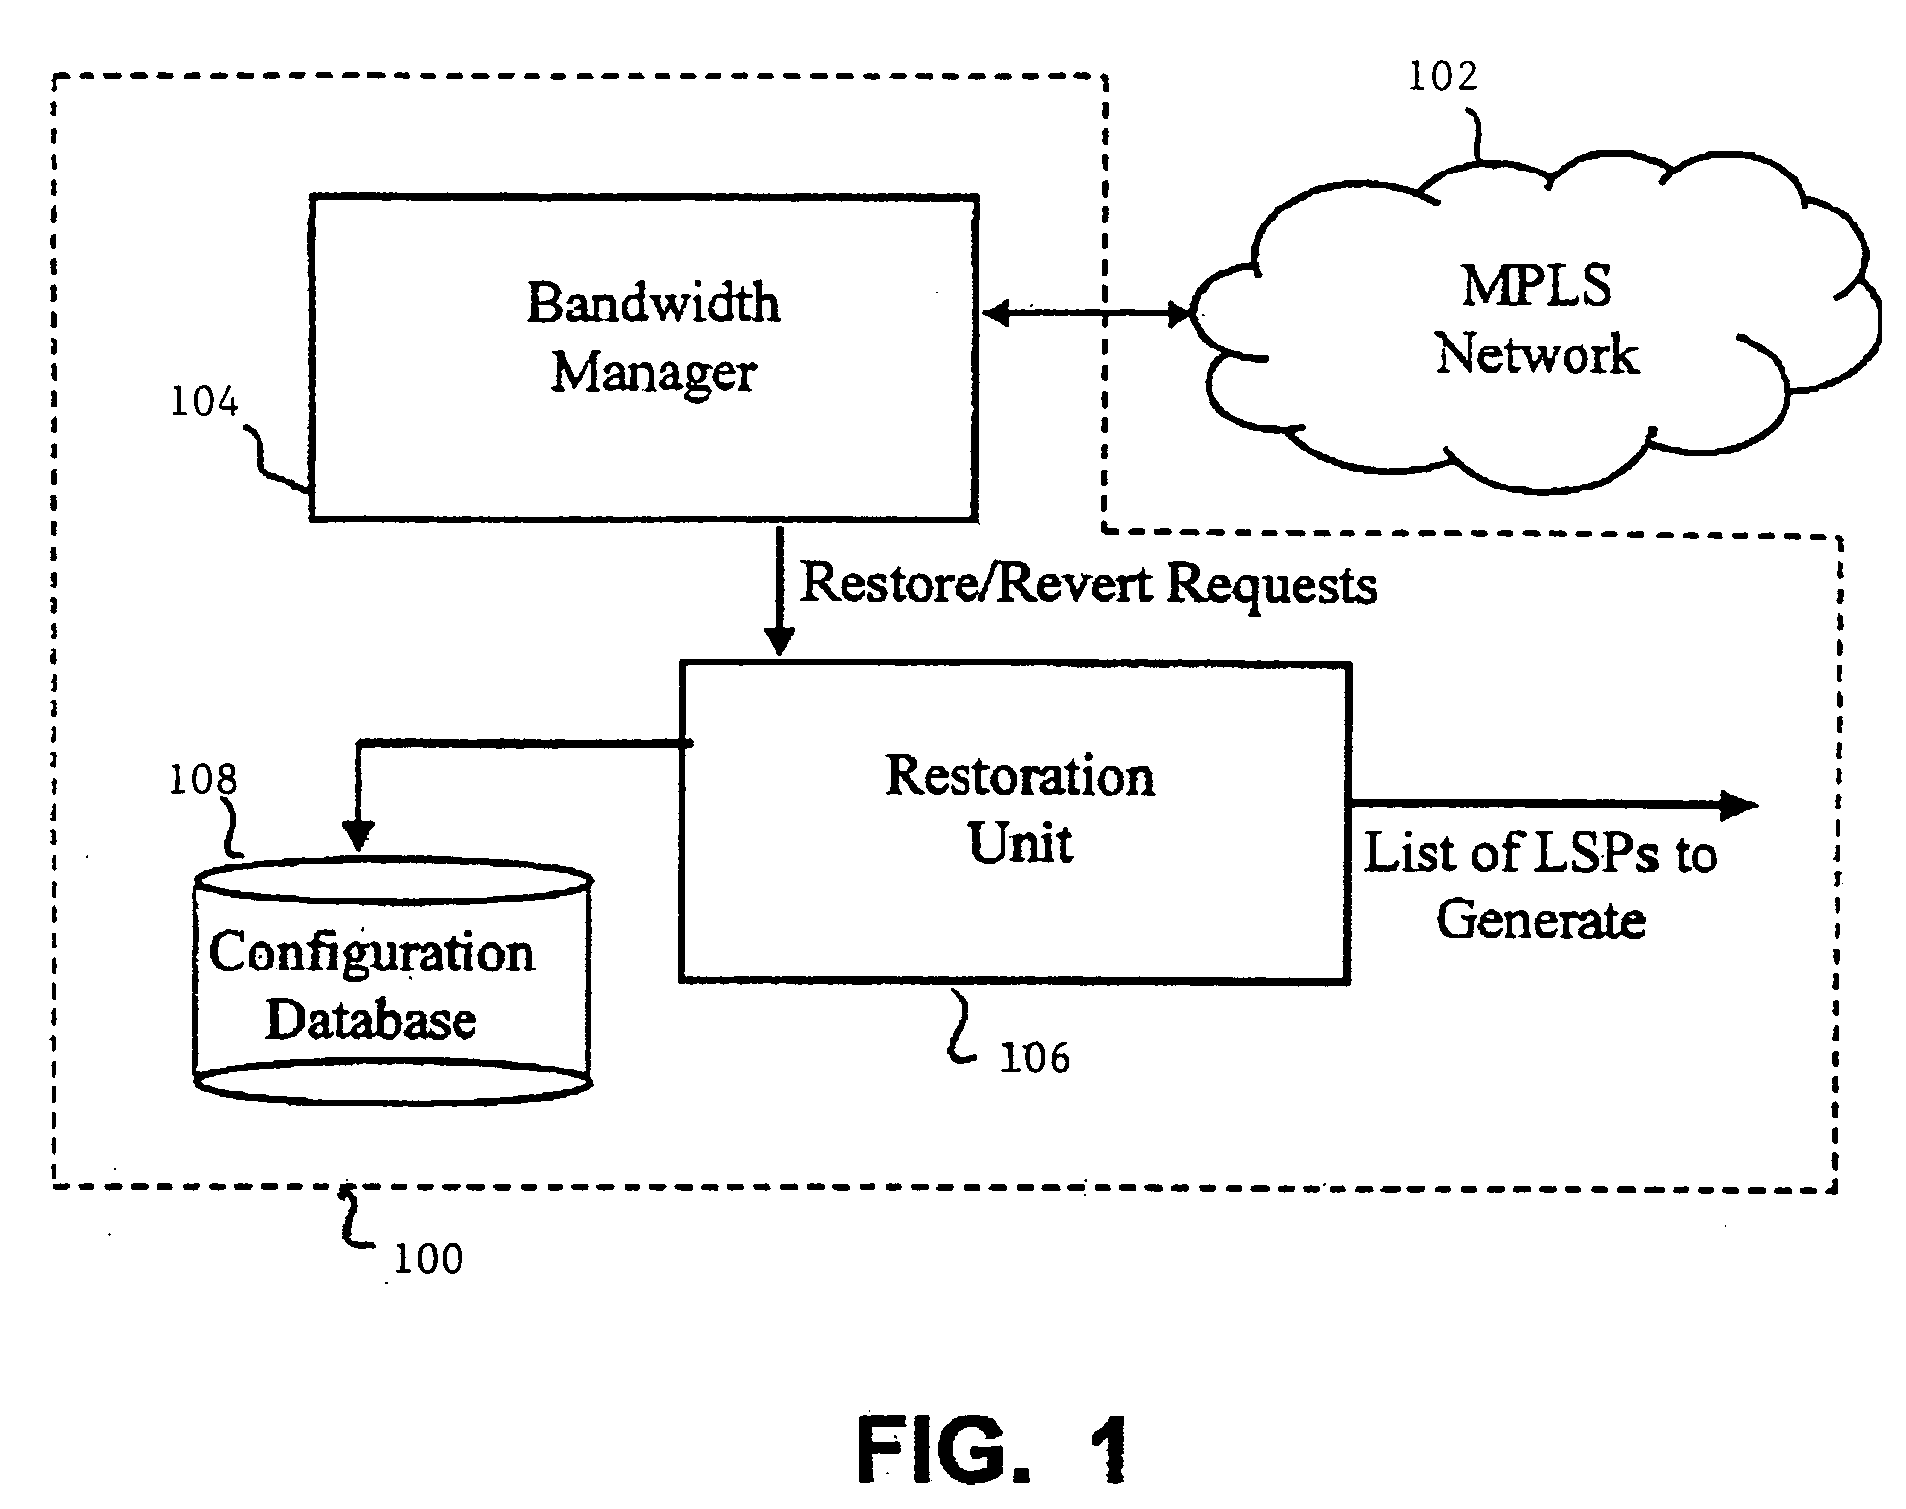 Dynamic traffic rearrangement and restoration for MPLS networks with differentiated services capabilities